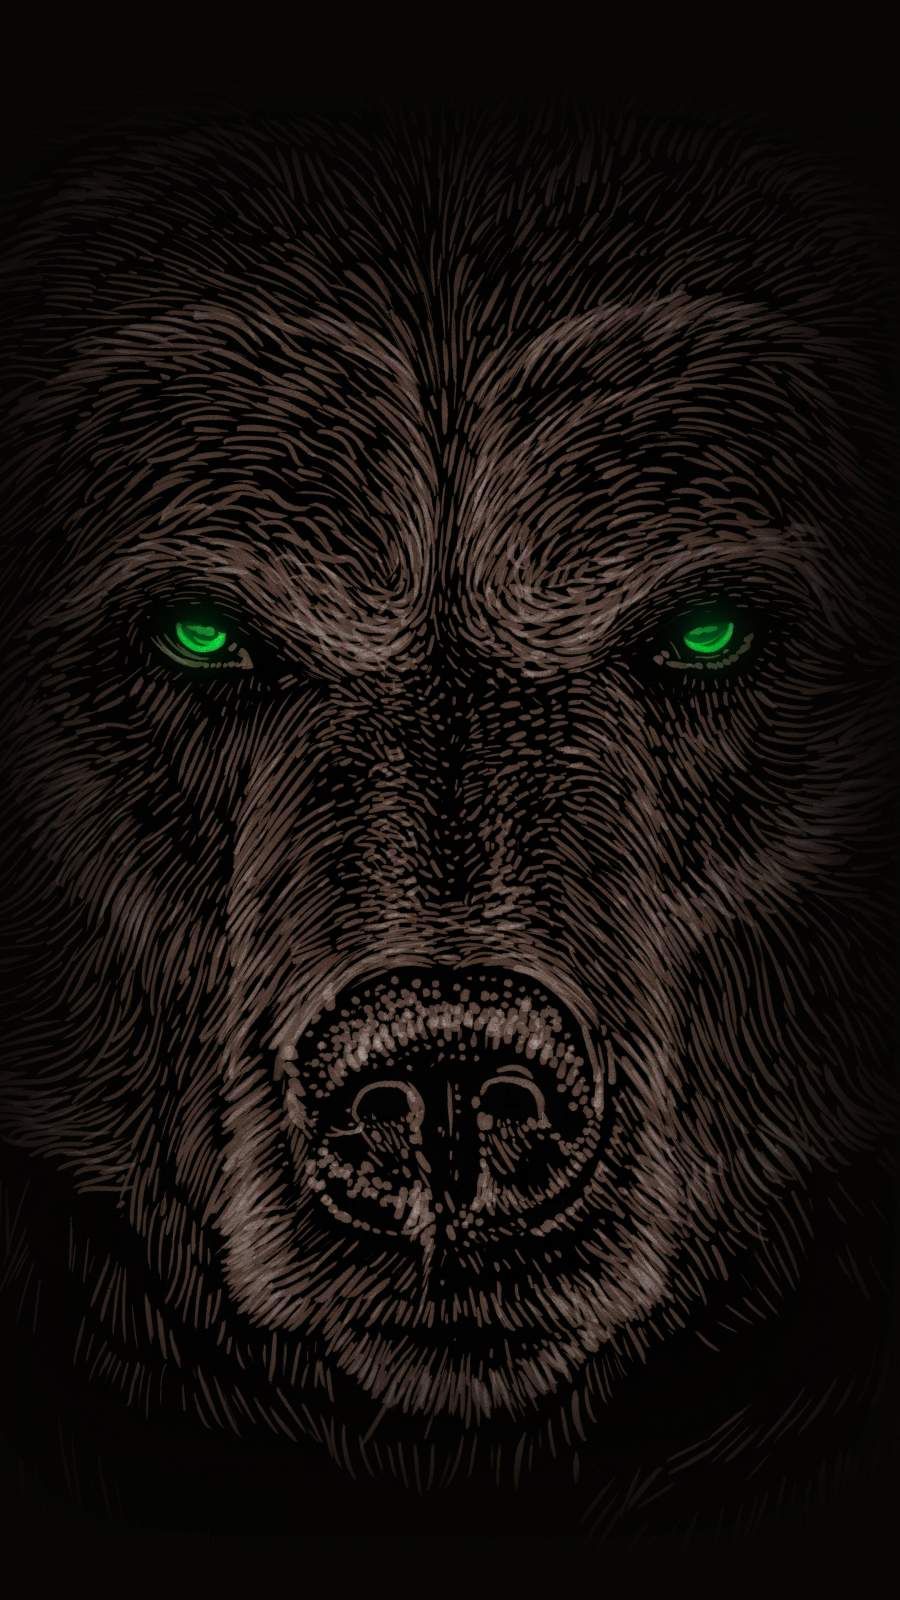 Grizzly Bear iPhone Wallpaper. Bear artwork, Grizzly bear drawing, Bear tattoo designs